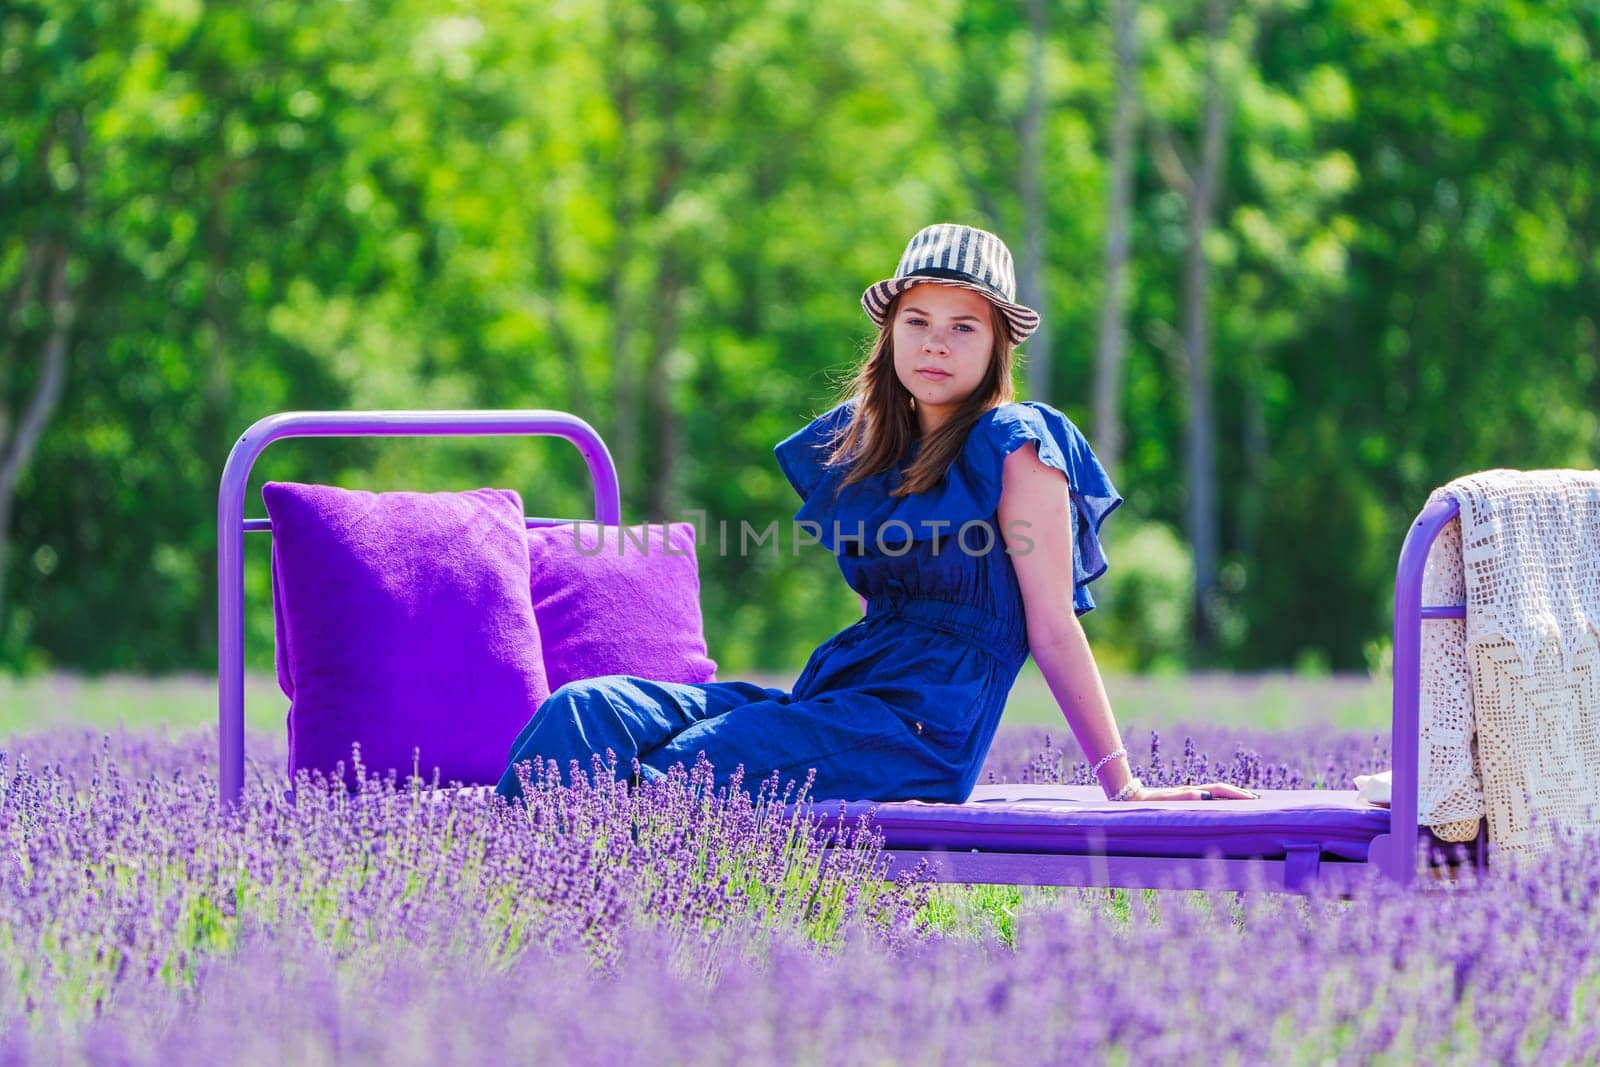 Enchanting Elegance: A Beautiful Girl amidst Lavender Fields. A Dreamy Summer Photo Session in the Lavender Field